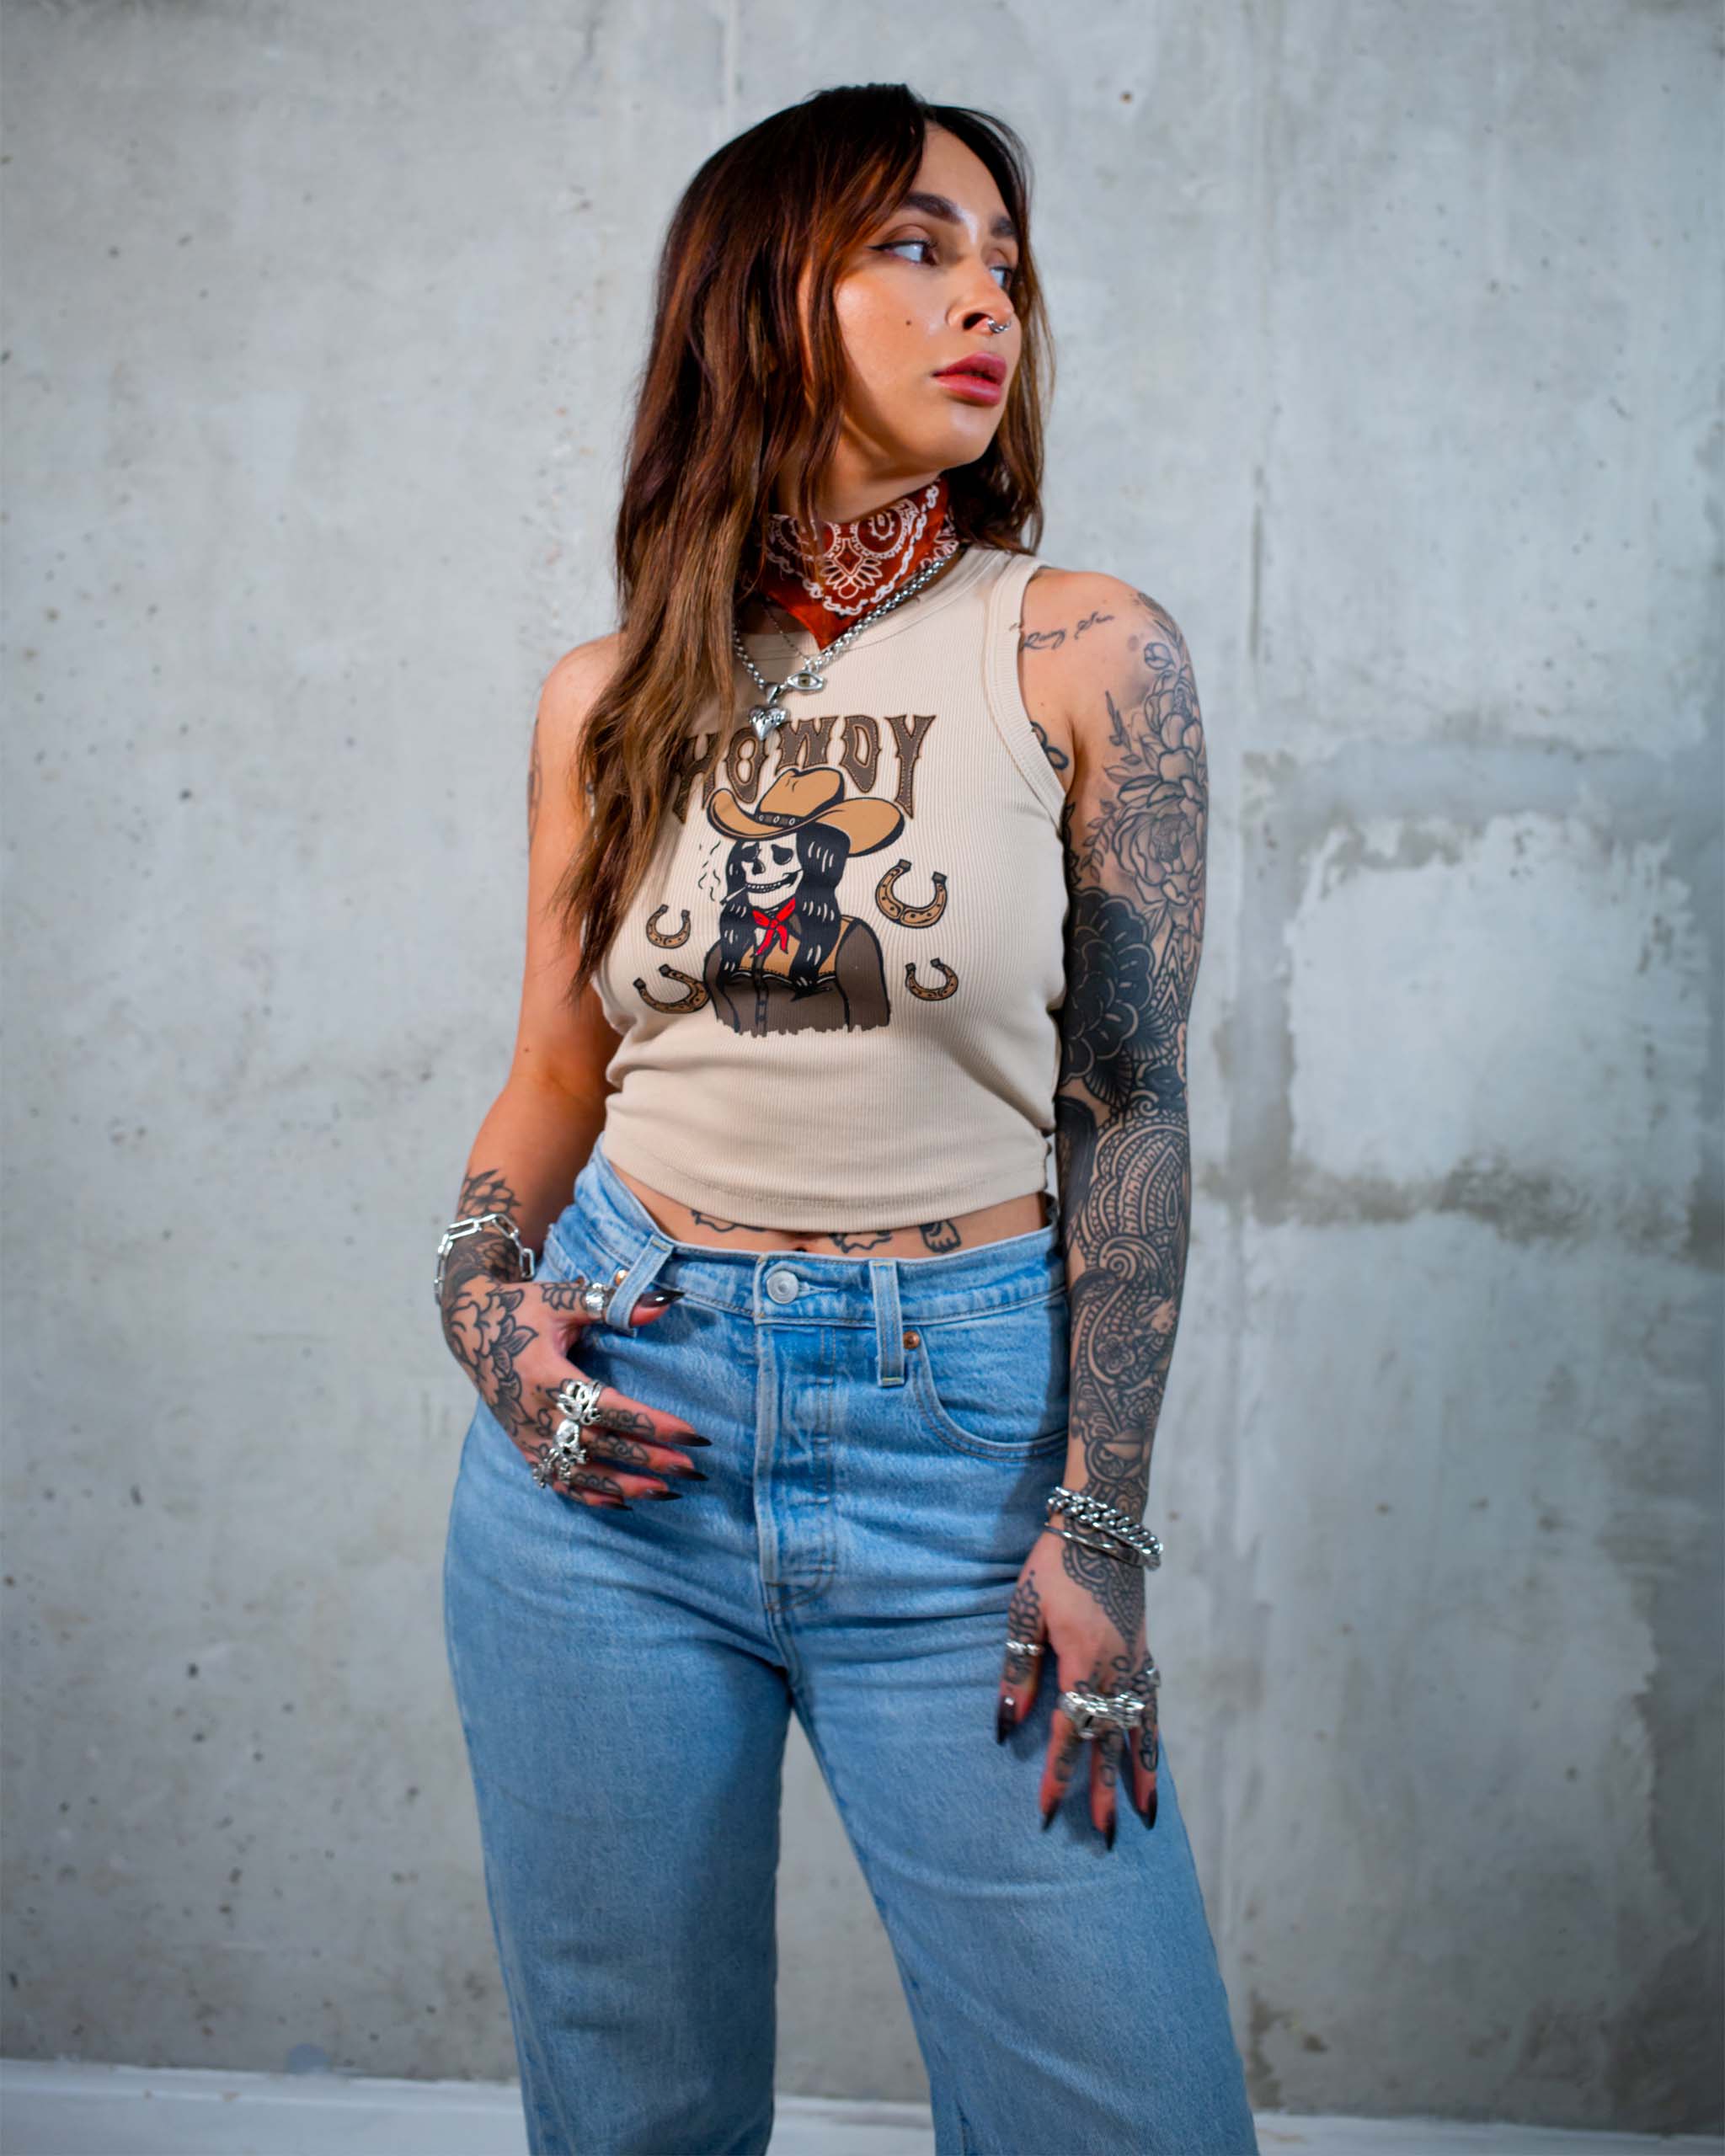 The Howdy tank top by Sleazy Rider, featuring a wild west cowgirl skull.